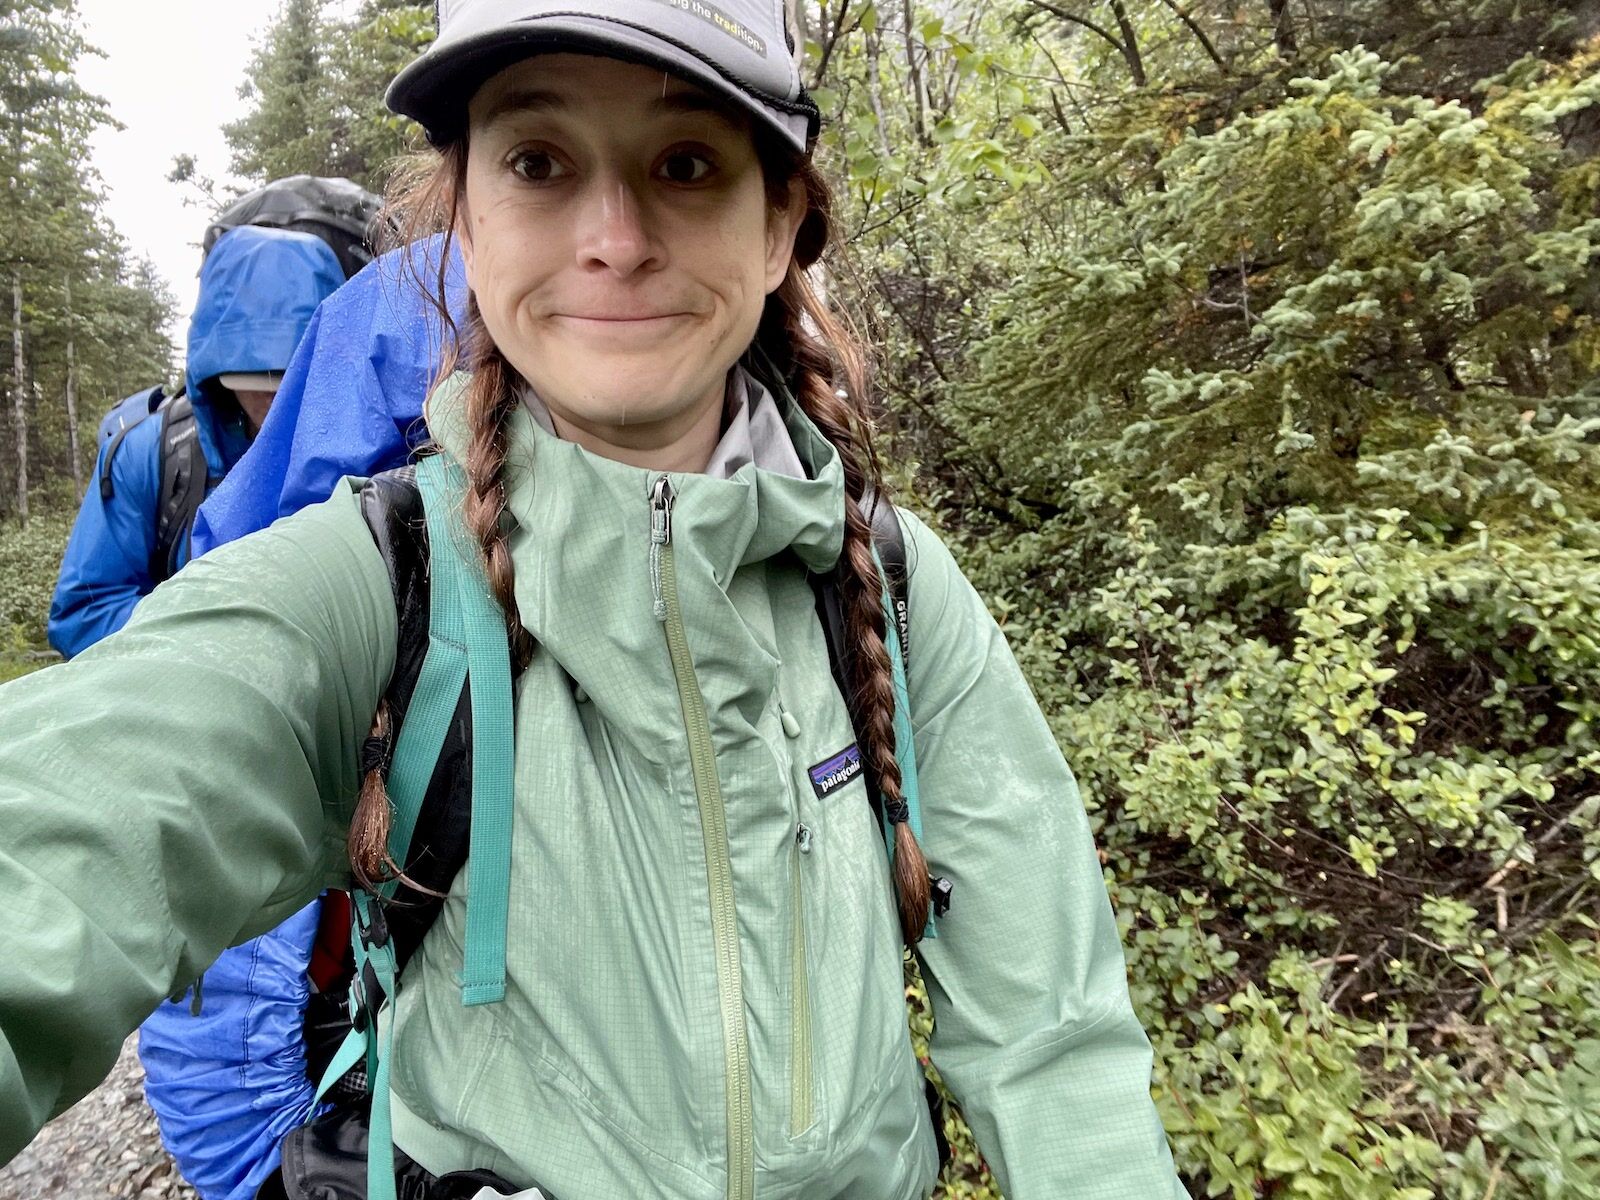 We Tested Patagonia Rain Jackets in the Real World and These Are